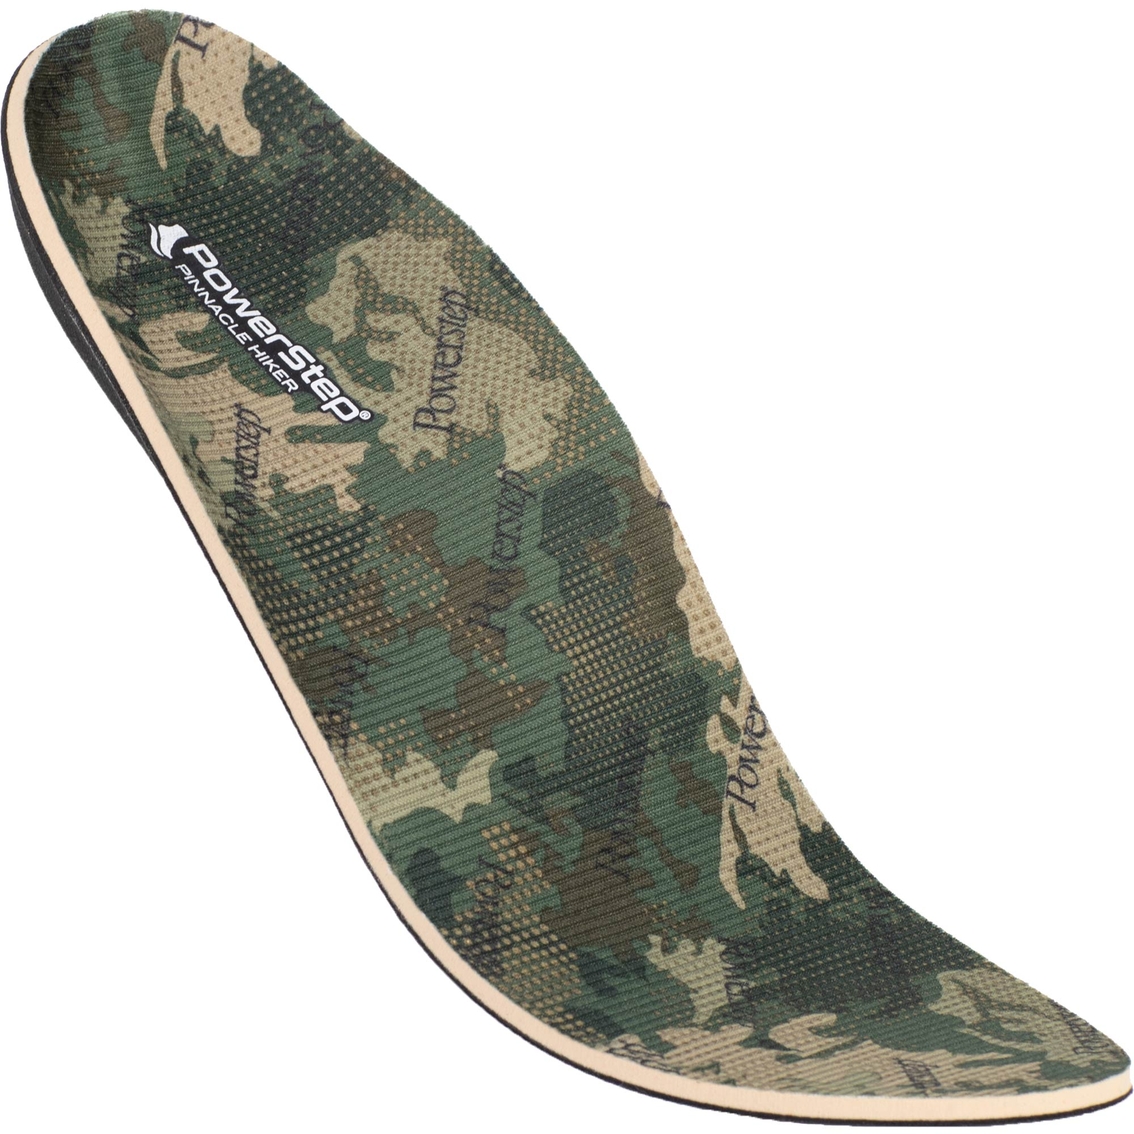 Powerstep Journey Hiker Full Insoles - Image 4 of 5